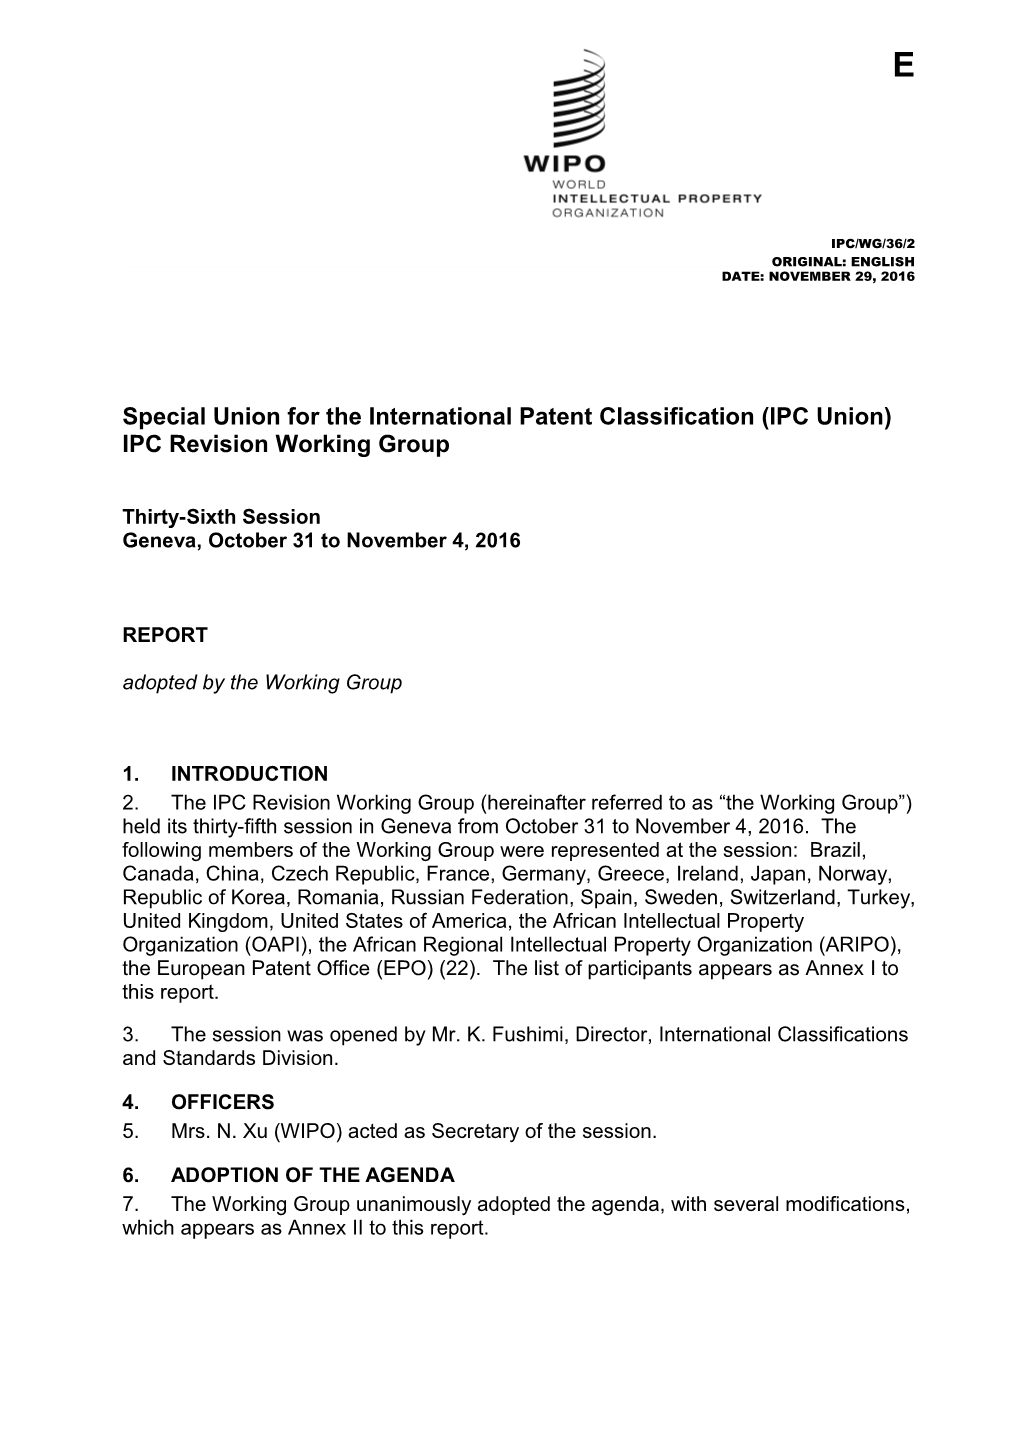 IPC/WG/36/2, Report, 36Th Session of the IPC Revision Working Group